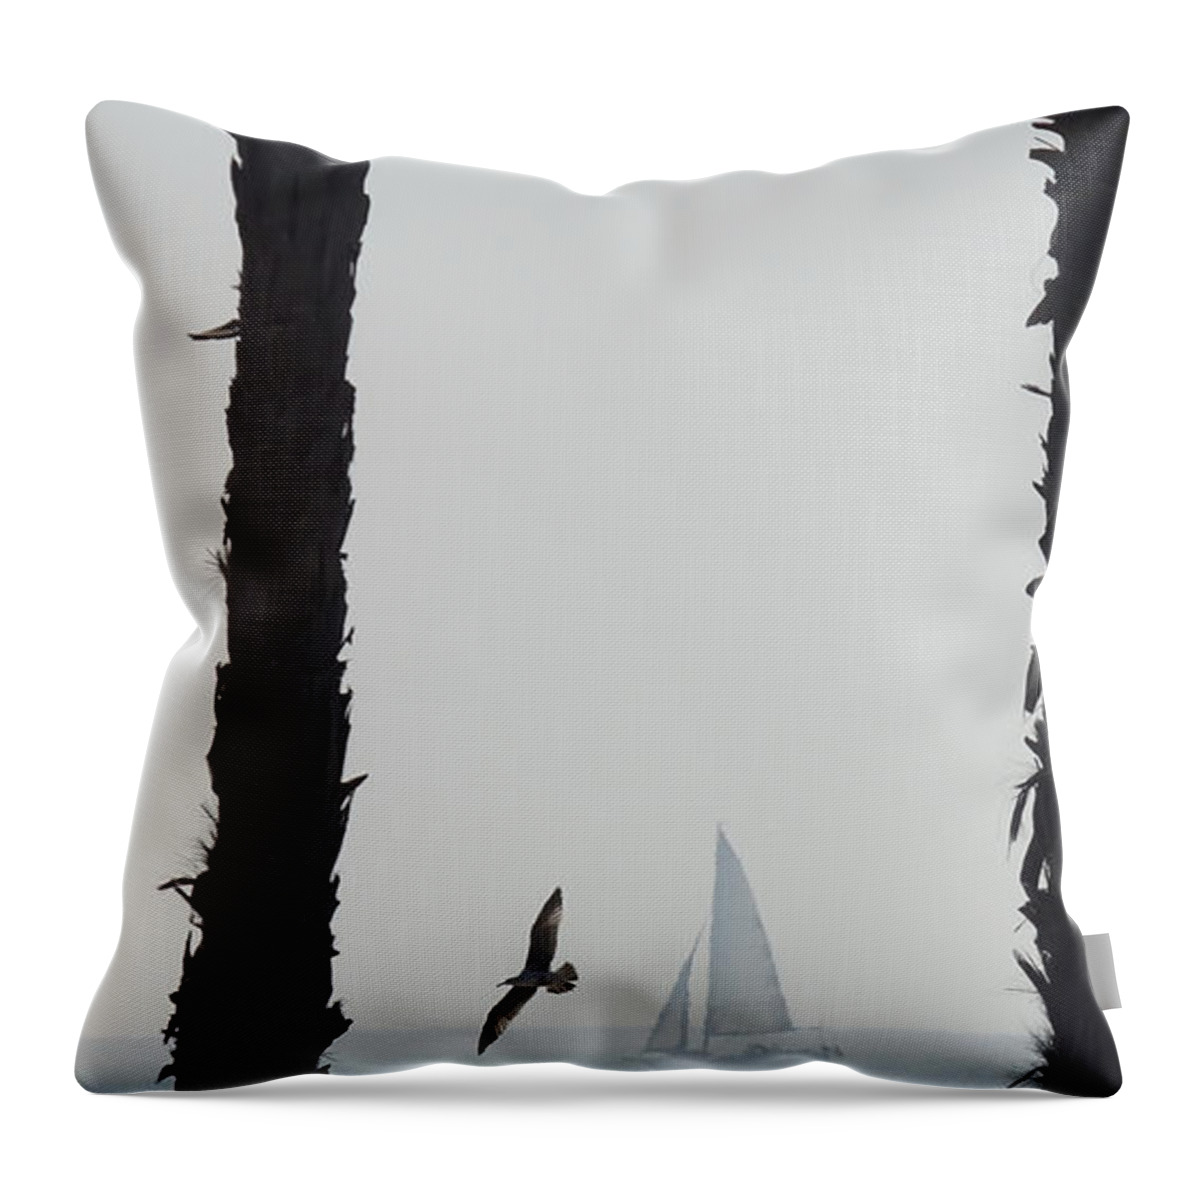 Boats Throw Pillow featuring the photograph Sailing By 2 by Ernest Echols